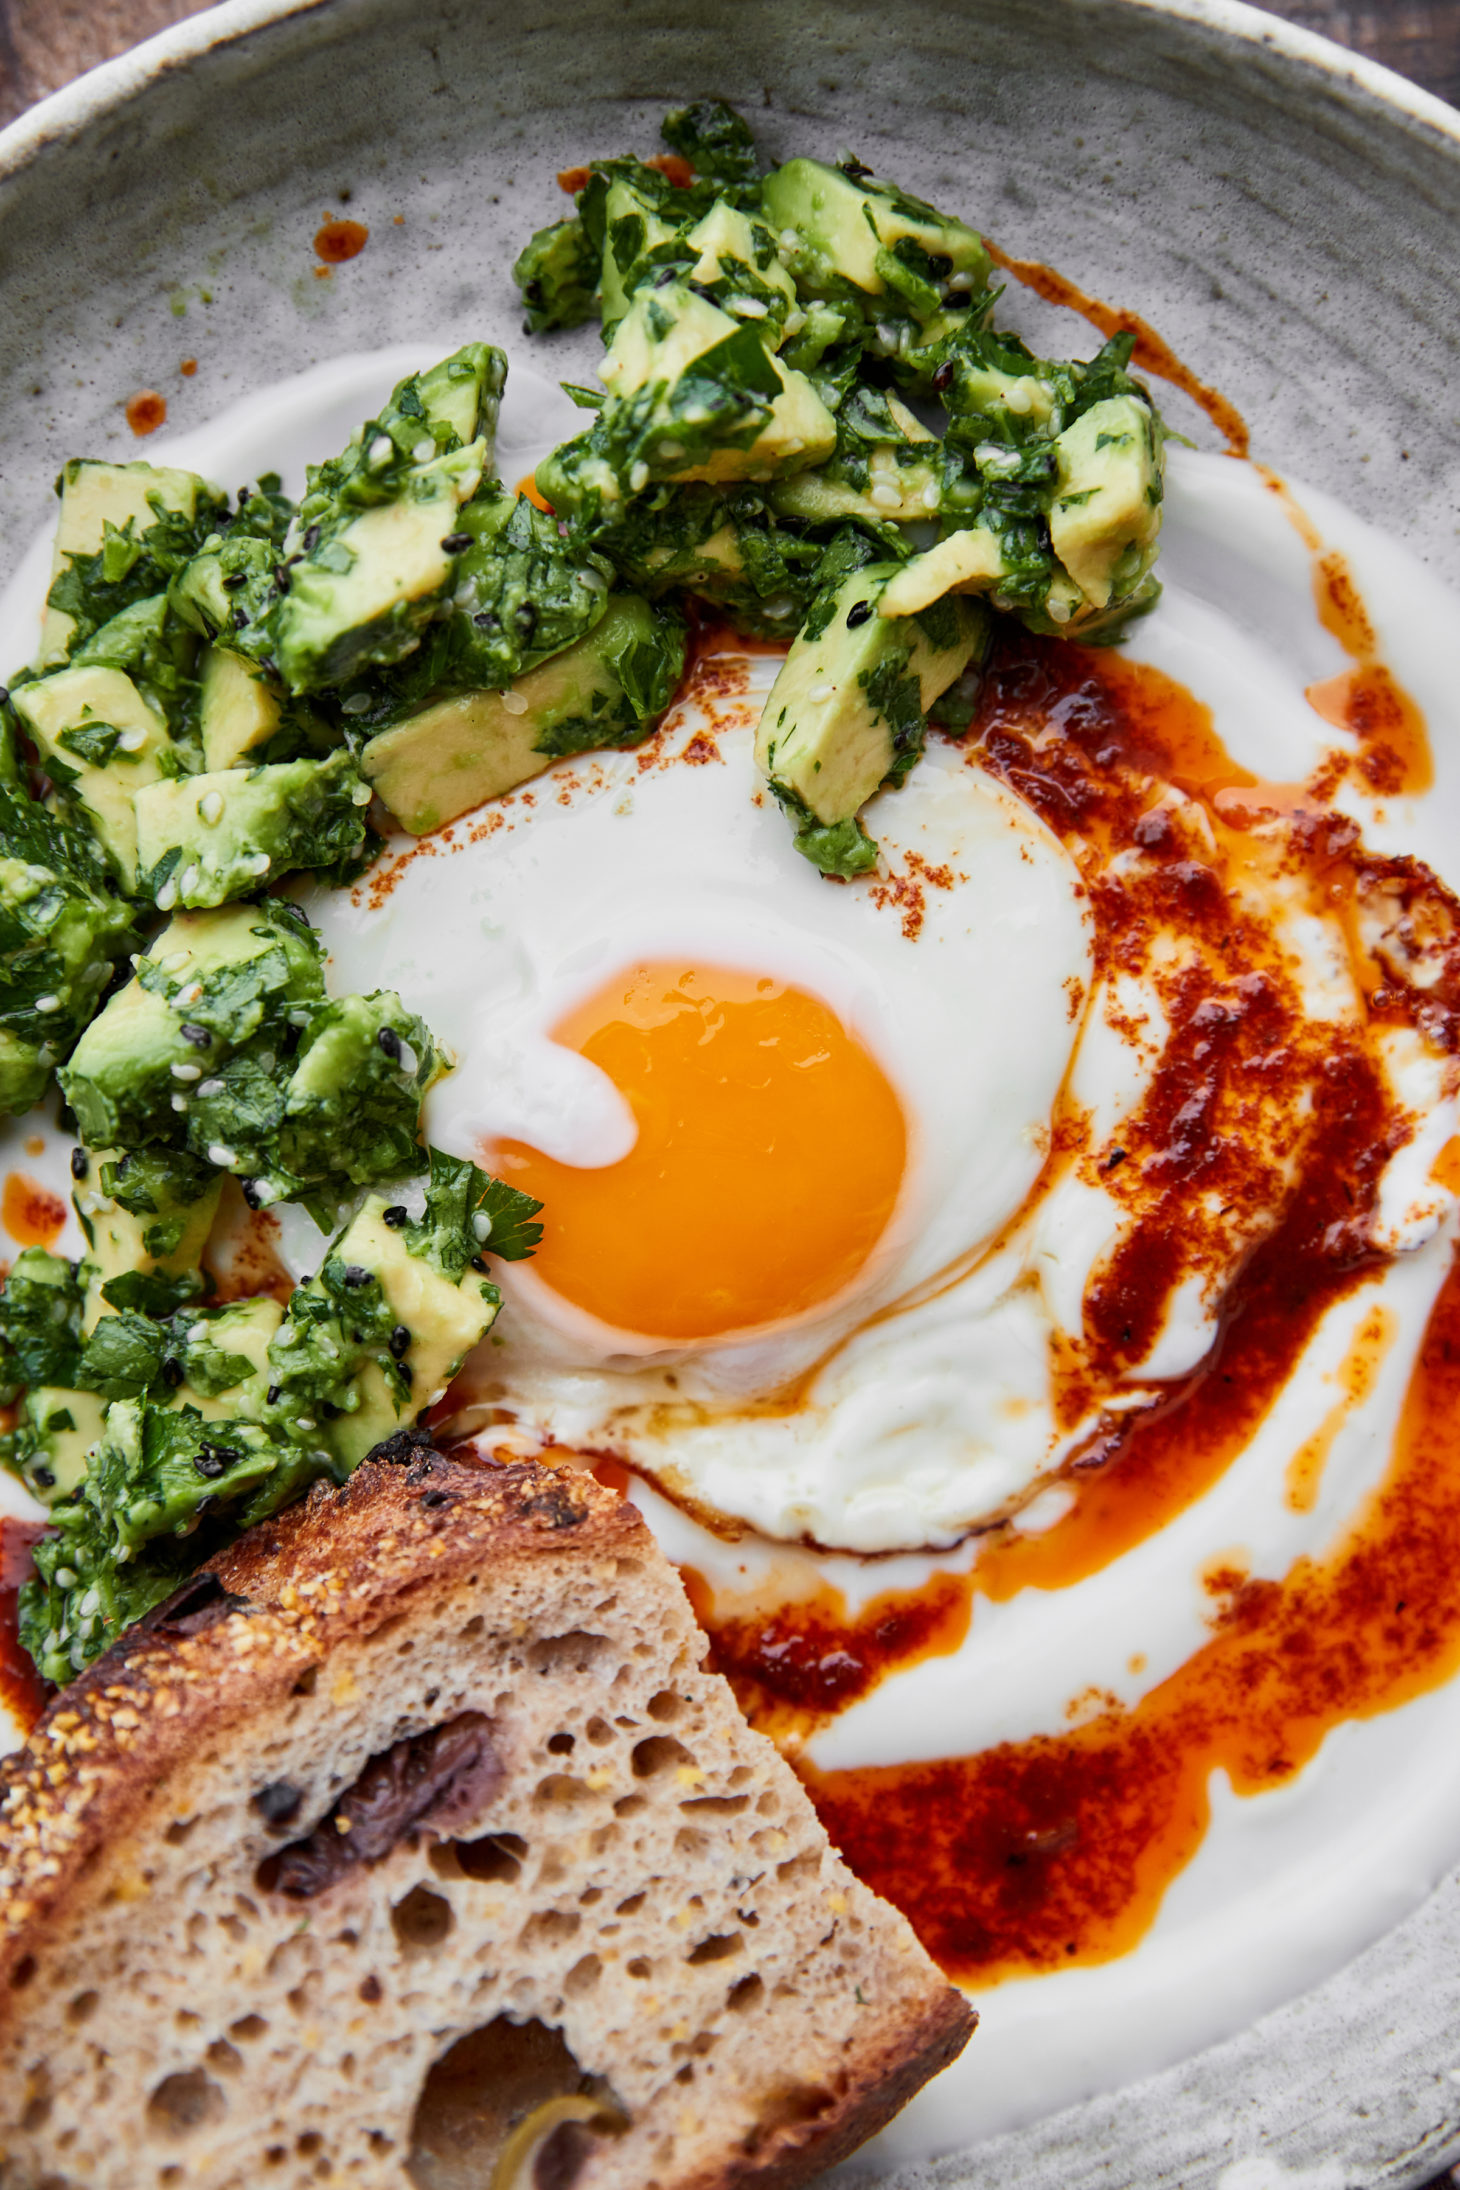 Close-up of a sunny-side egg on top of yogurt and topped with a fiery red butter sauce and diced avocado tossed in herbs.